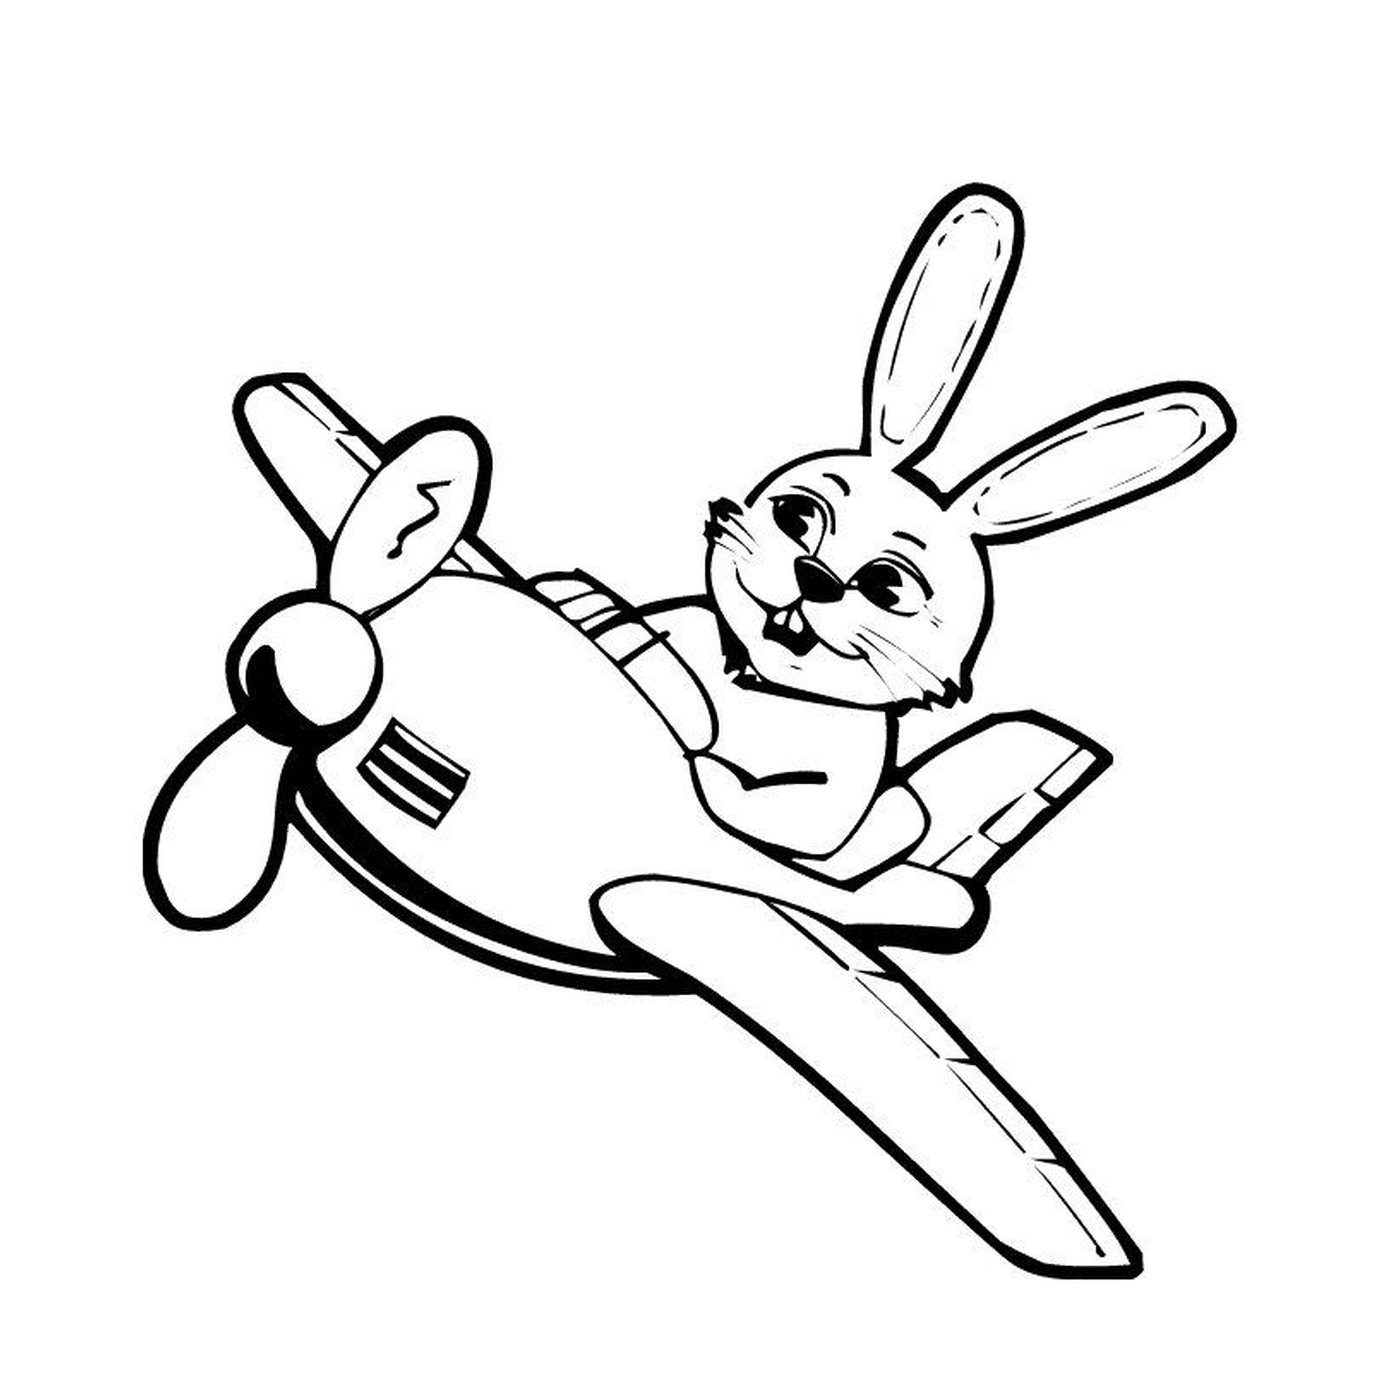  A plane with a rabbit on it 